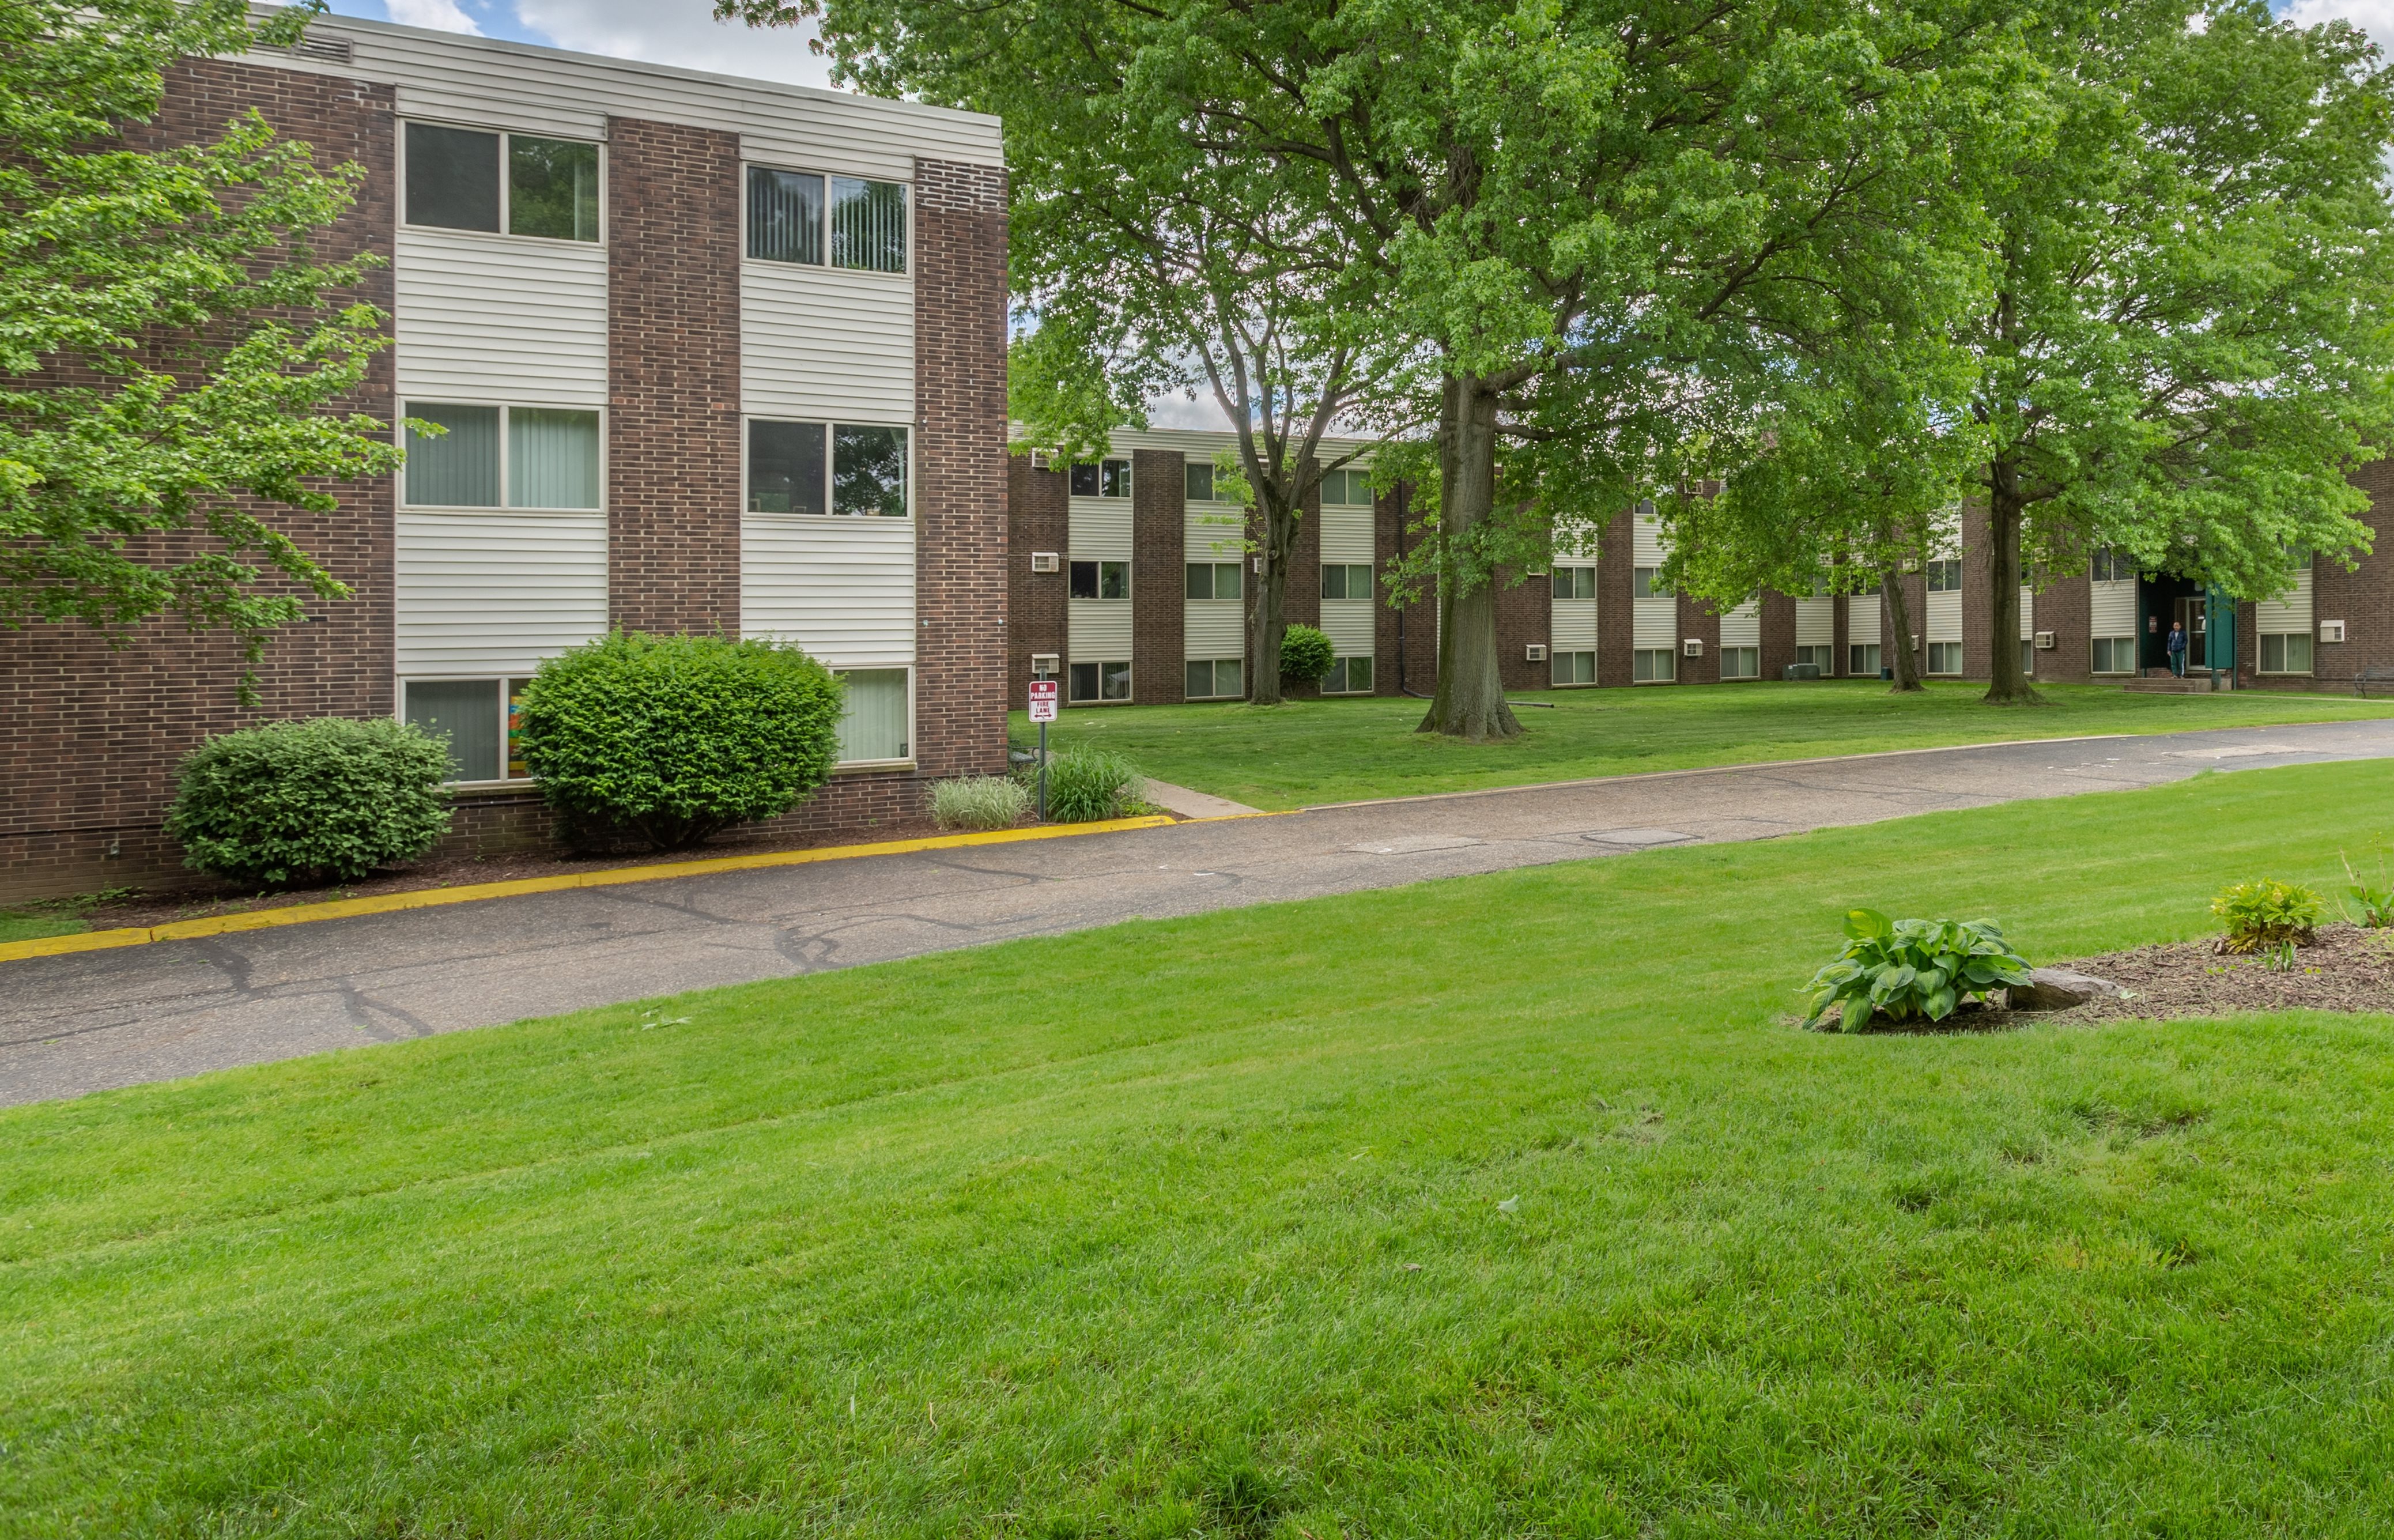 Lush Green Outdoors at Jordan Court Apartments,  Integrity Realty, Ohio, 44240